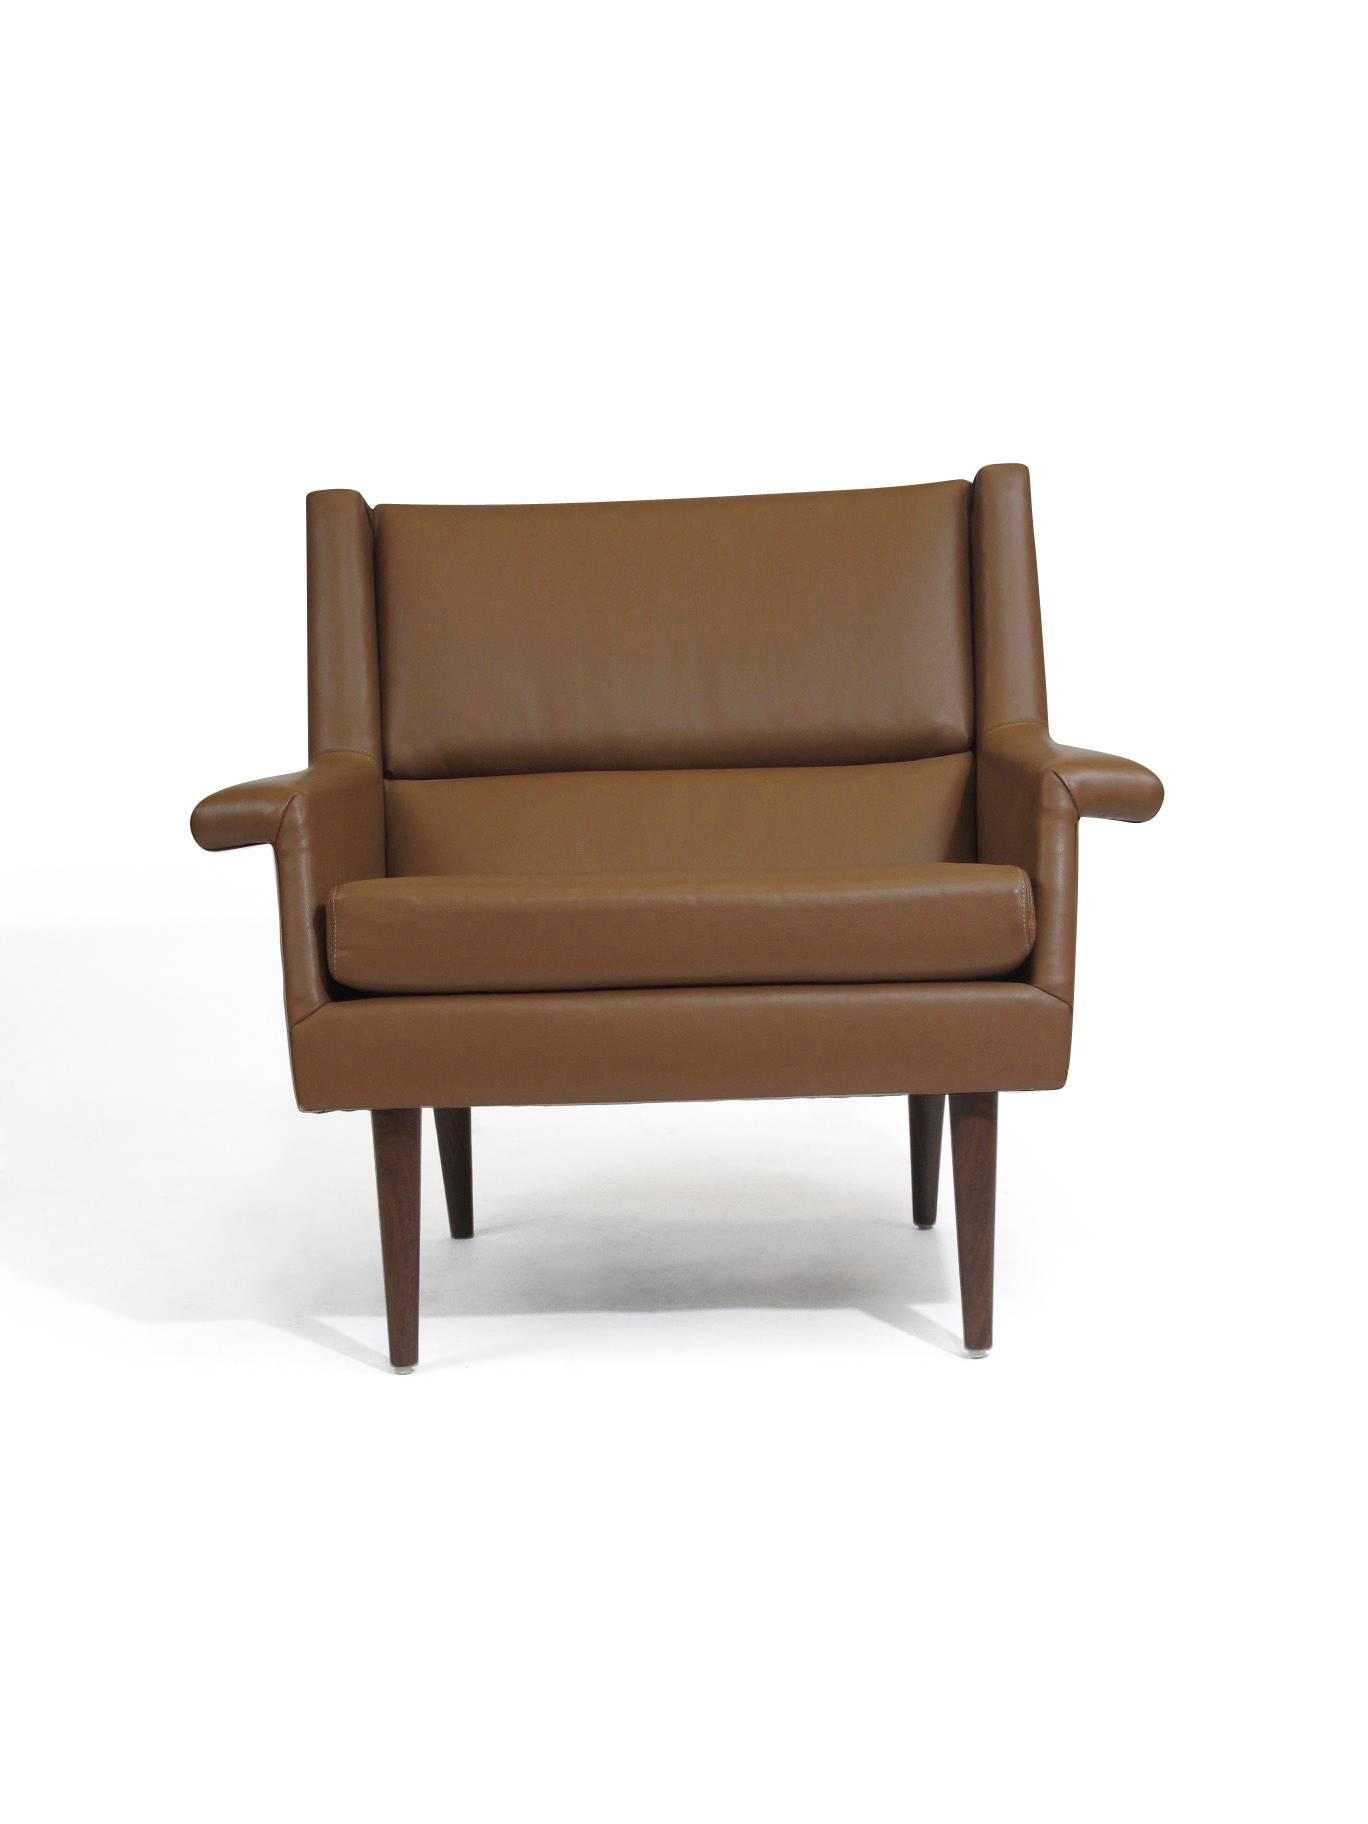 Milo Baughman for Thayer Coggin Brown Leather Lounge Chair 2